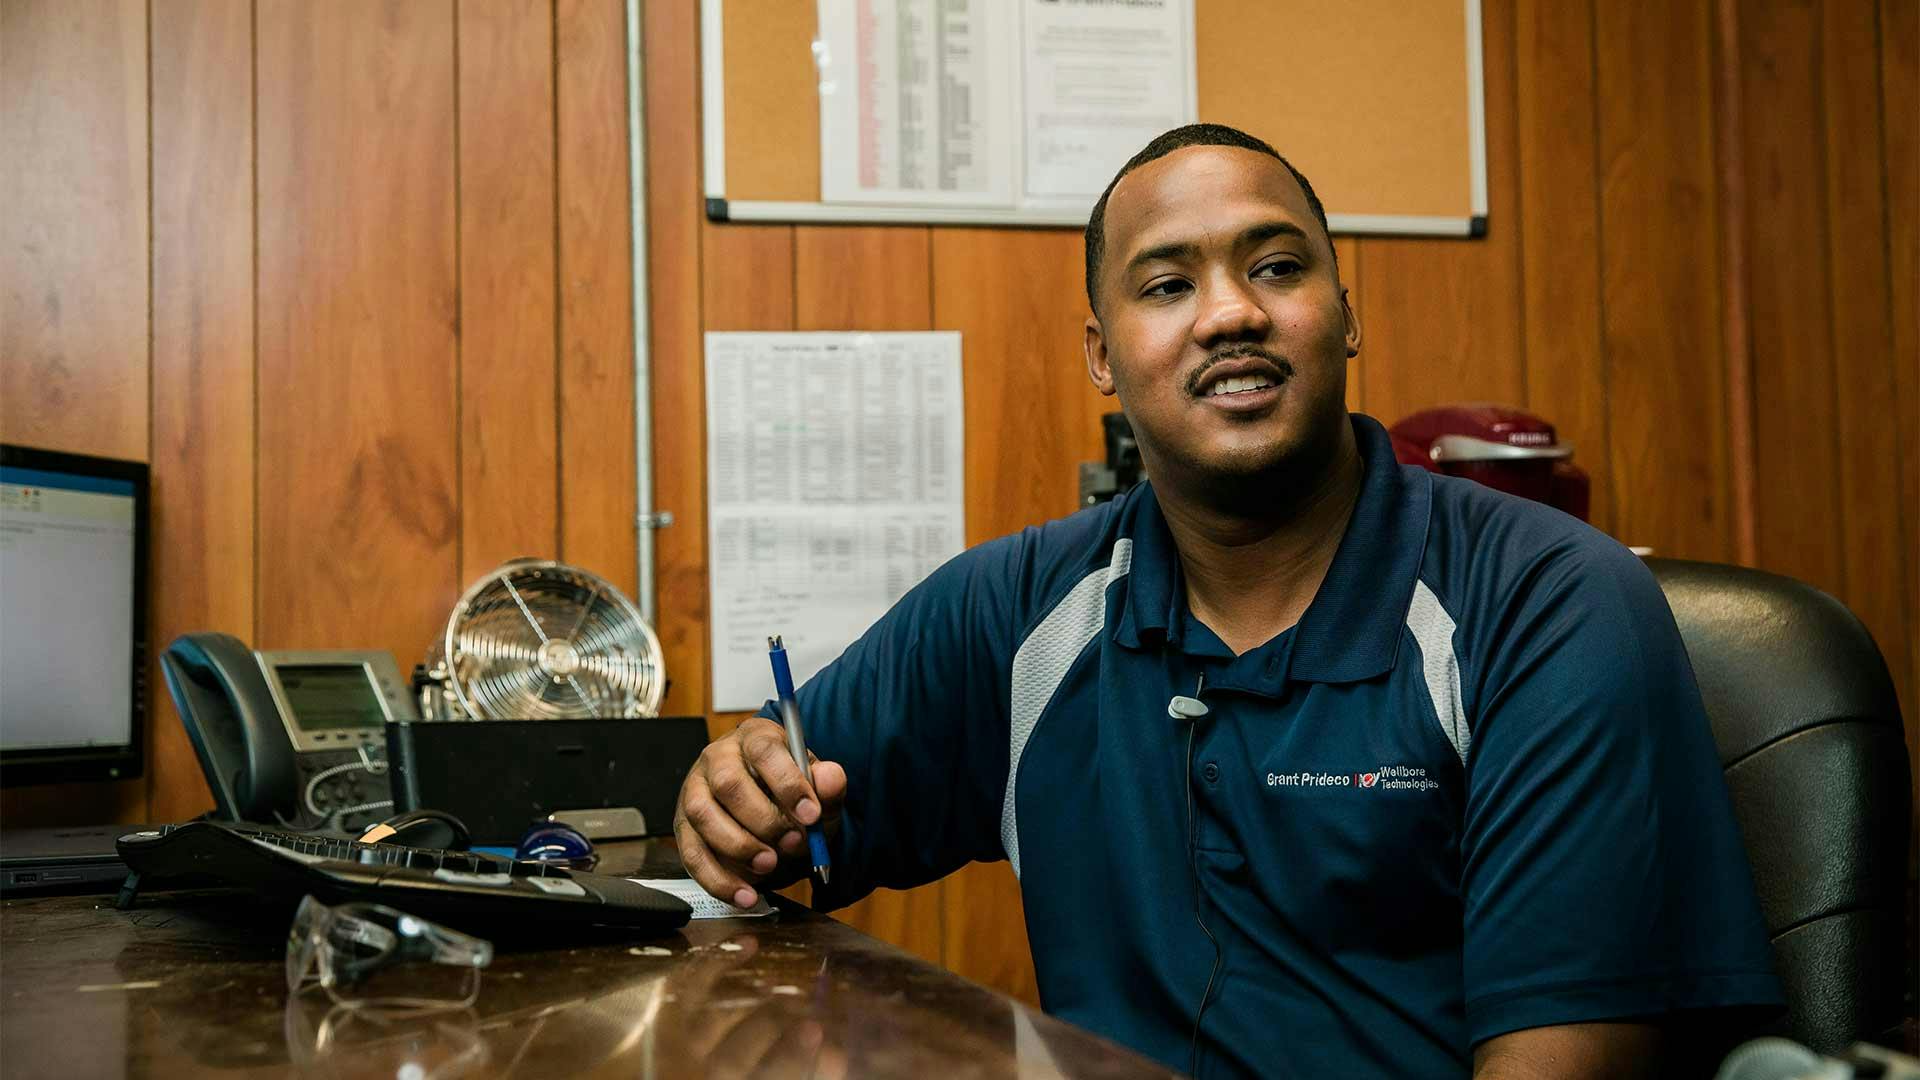 Turn and Bore supervisor II, Broddrick, in his office at Grant Prideco facility located in Navasota, TX